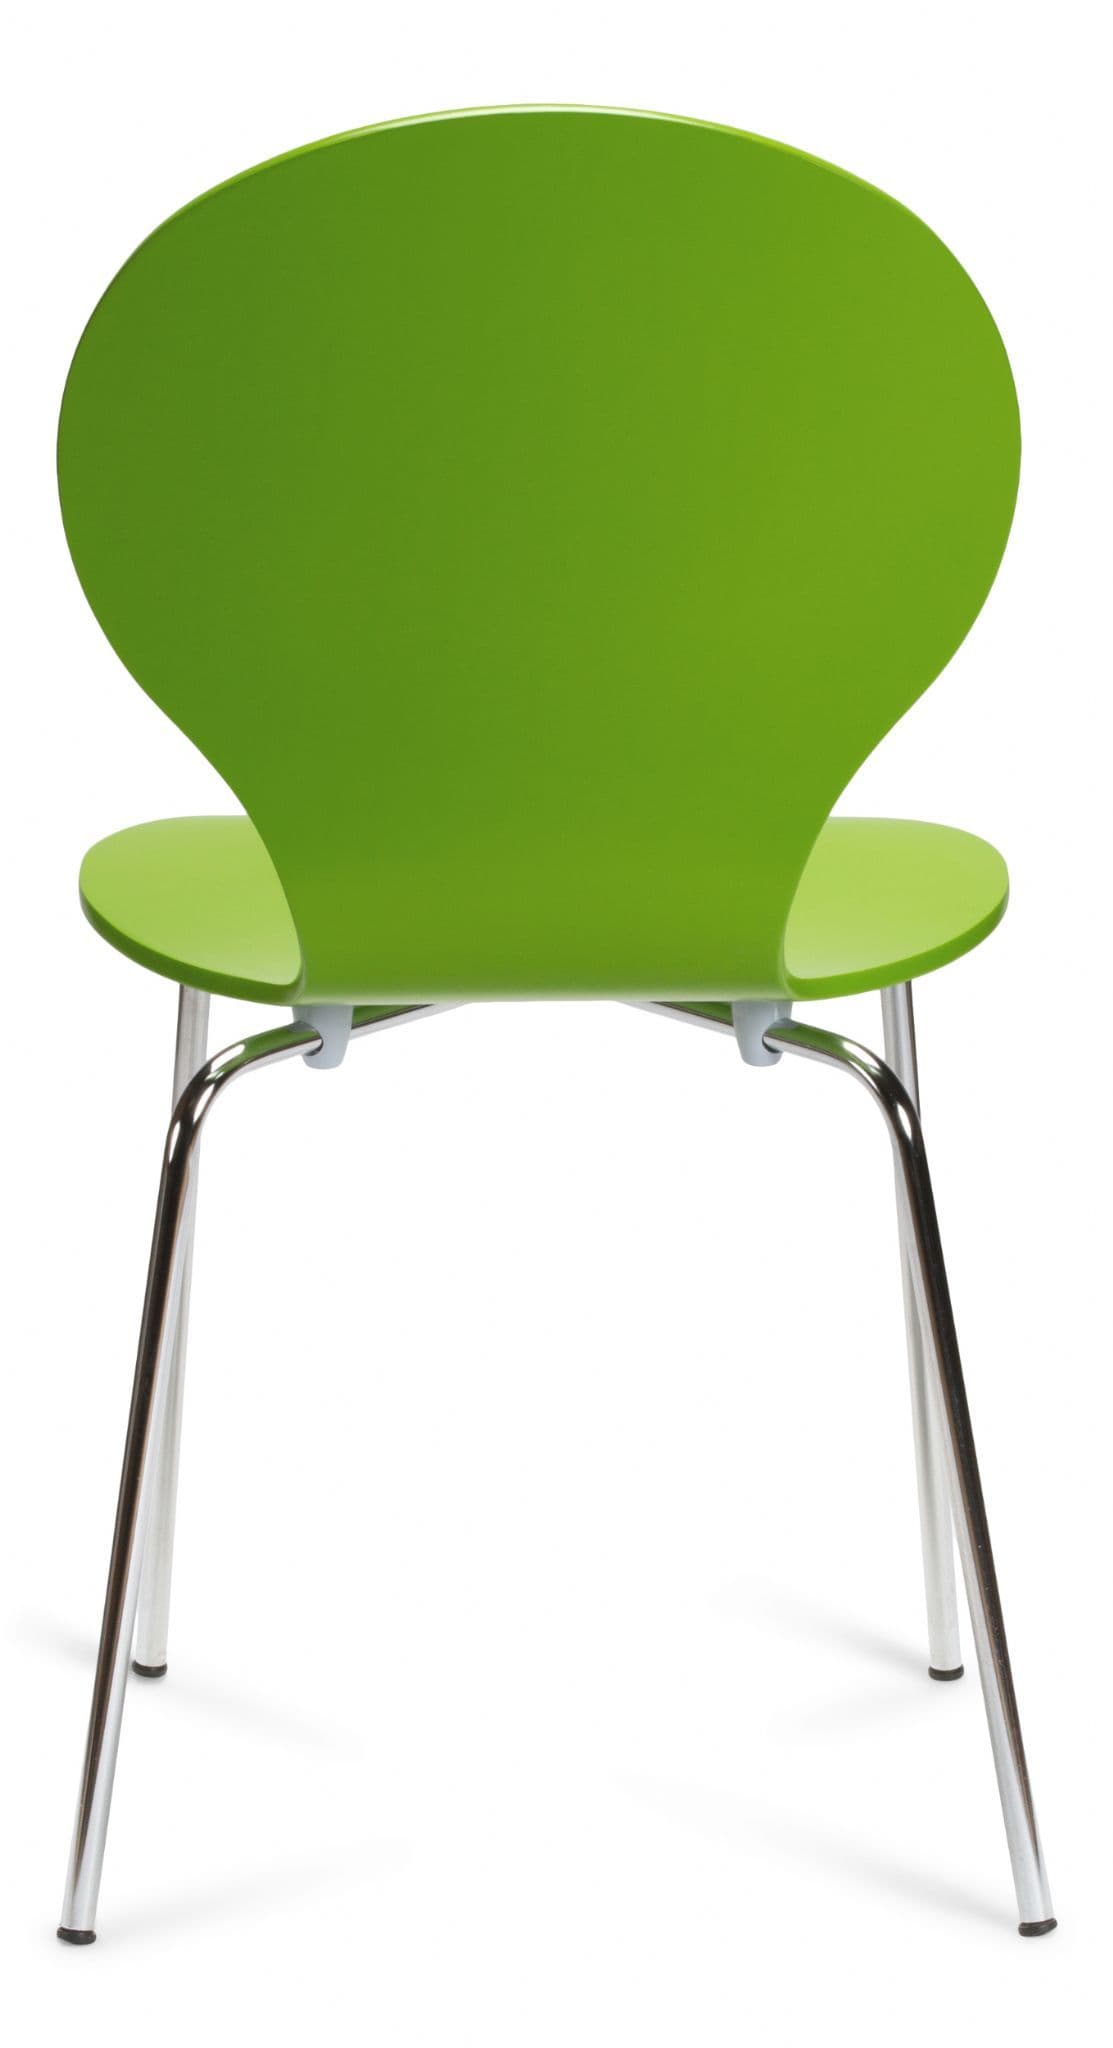 Kimberley Green & Chrome Dining Chairs Rear View